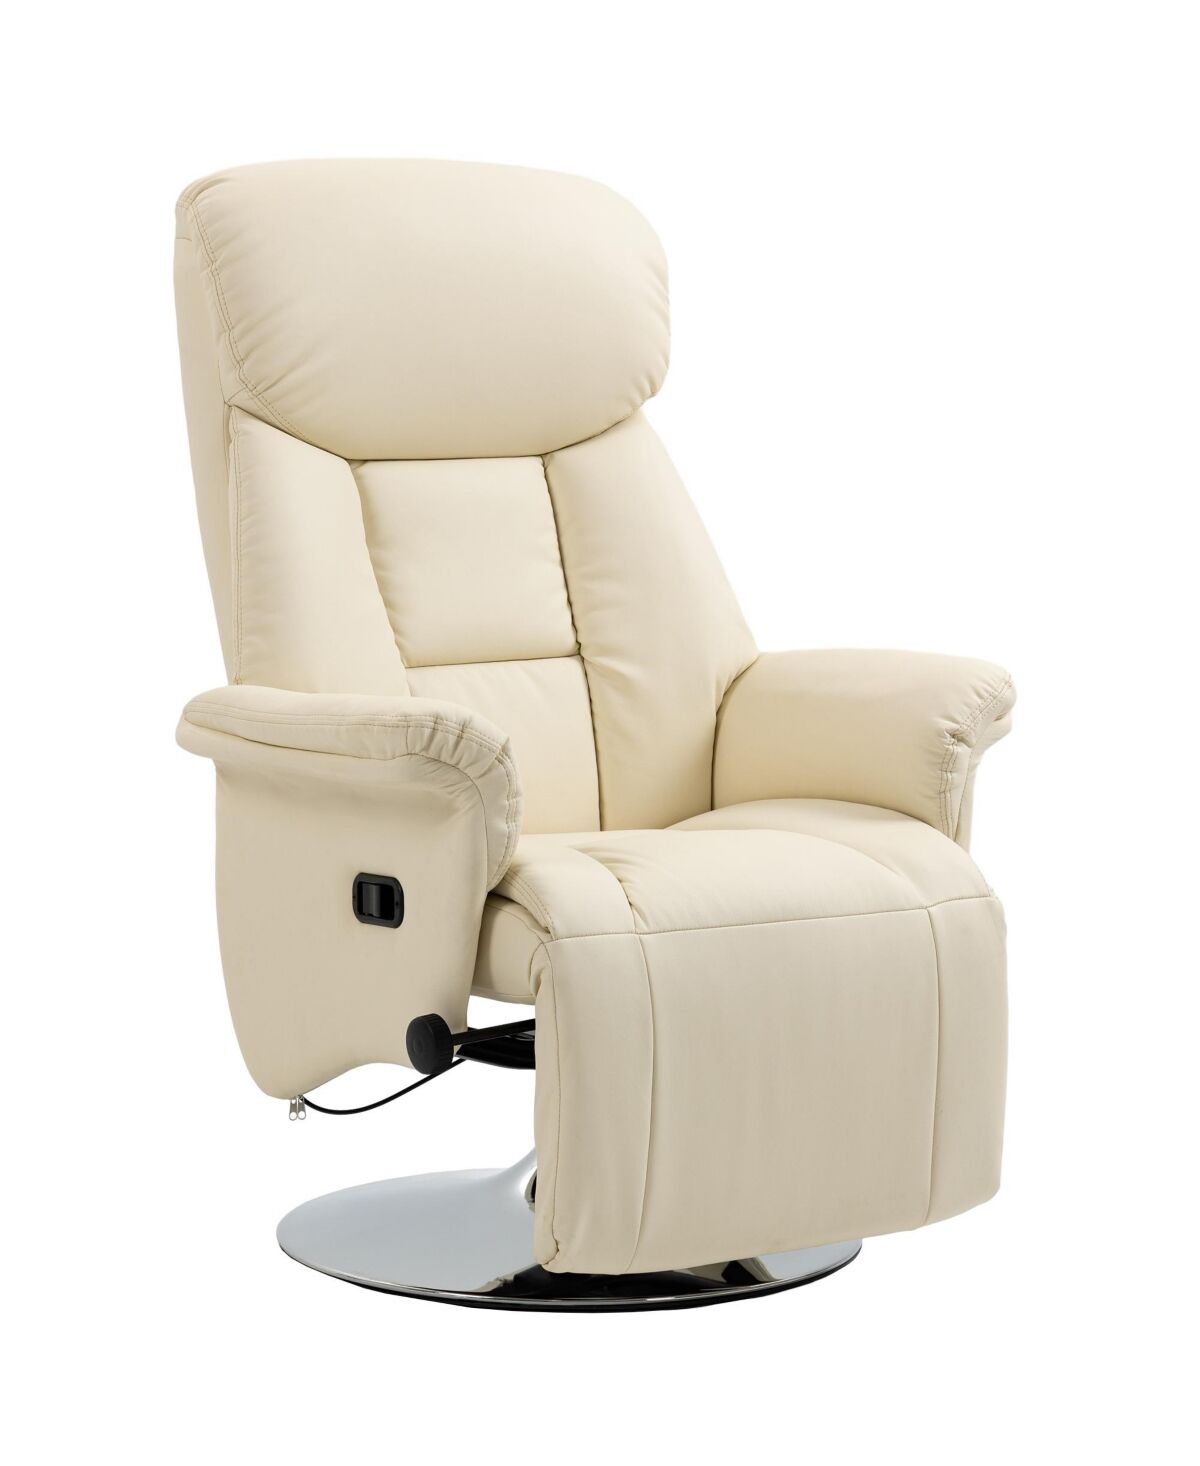 Homcom Adjustable Swivel Recliner Chair with Padded Arms - Cream White